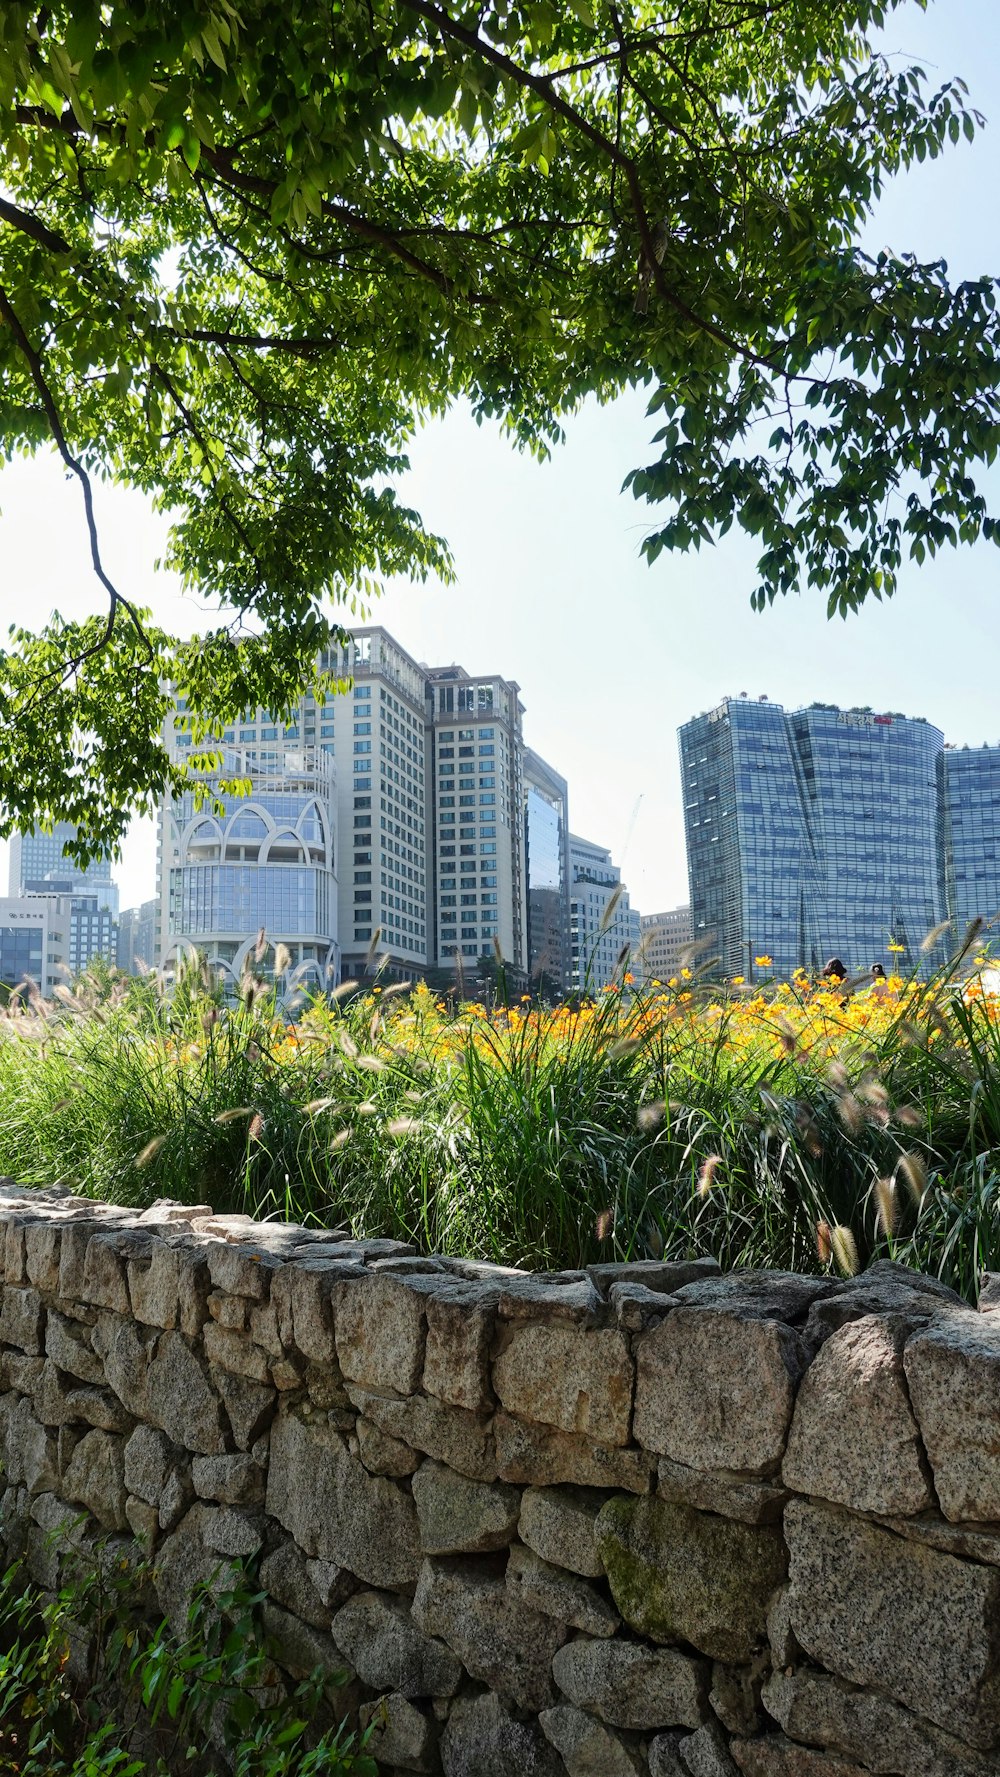 a stone wall in a park with buildings in the background